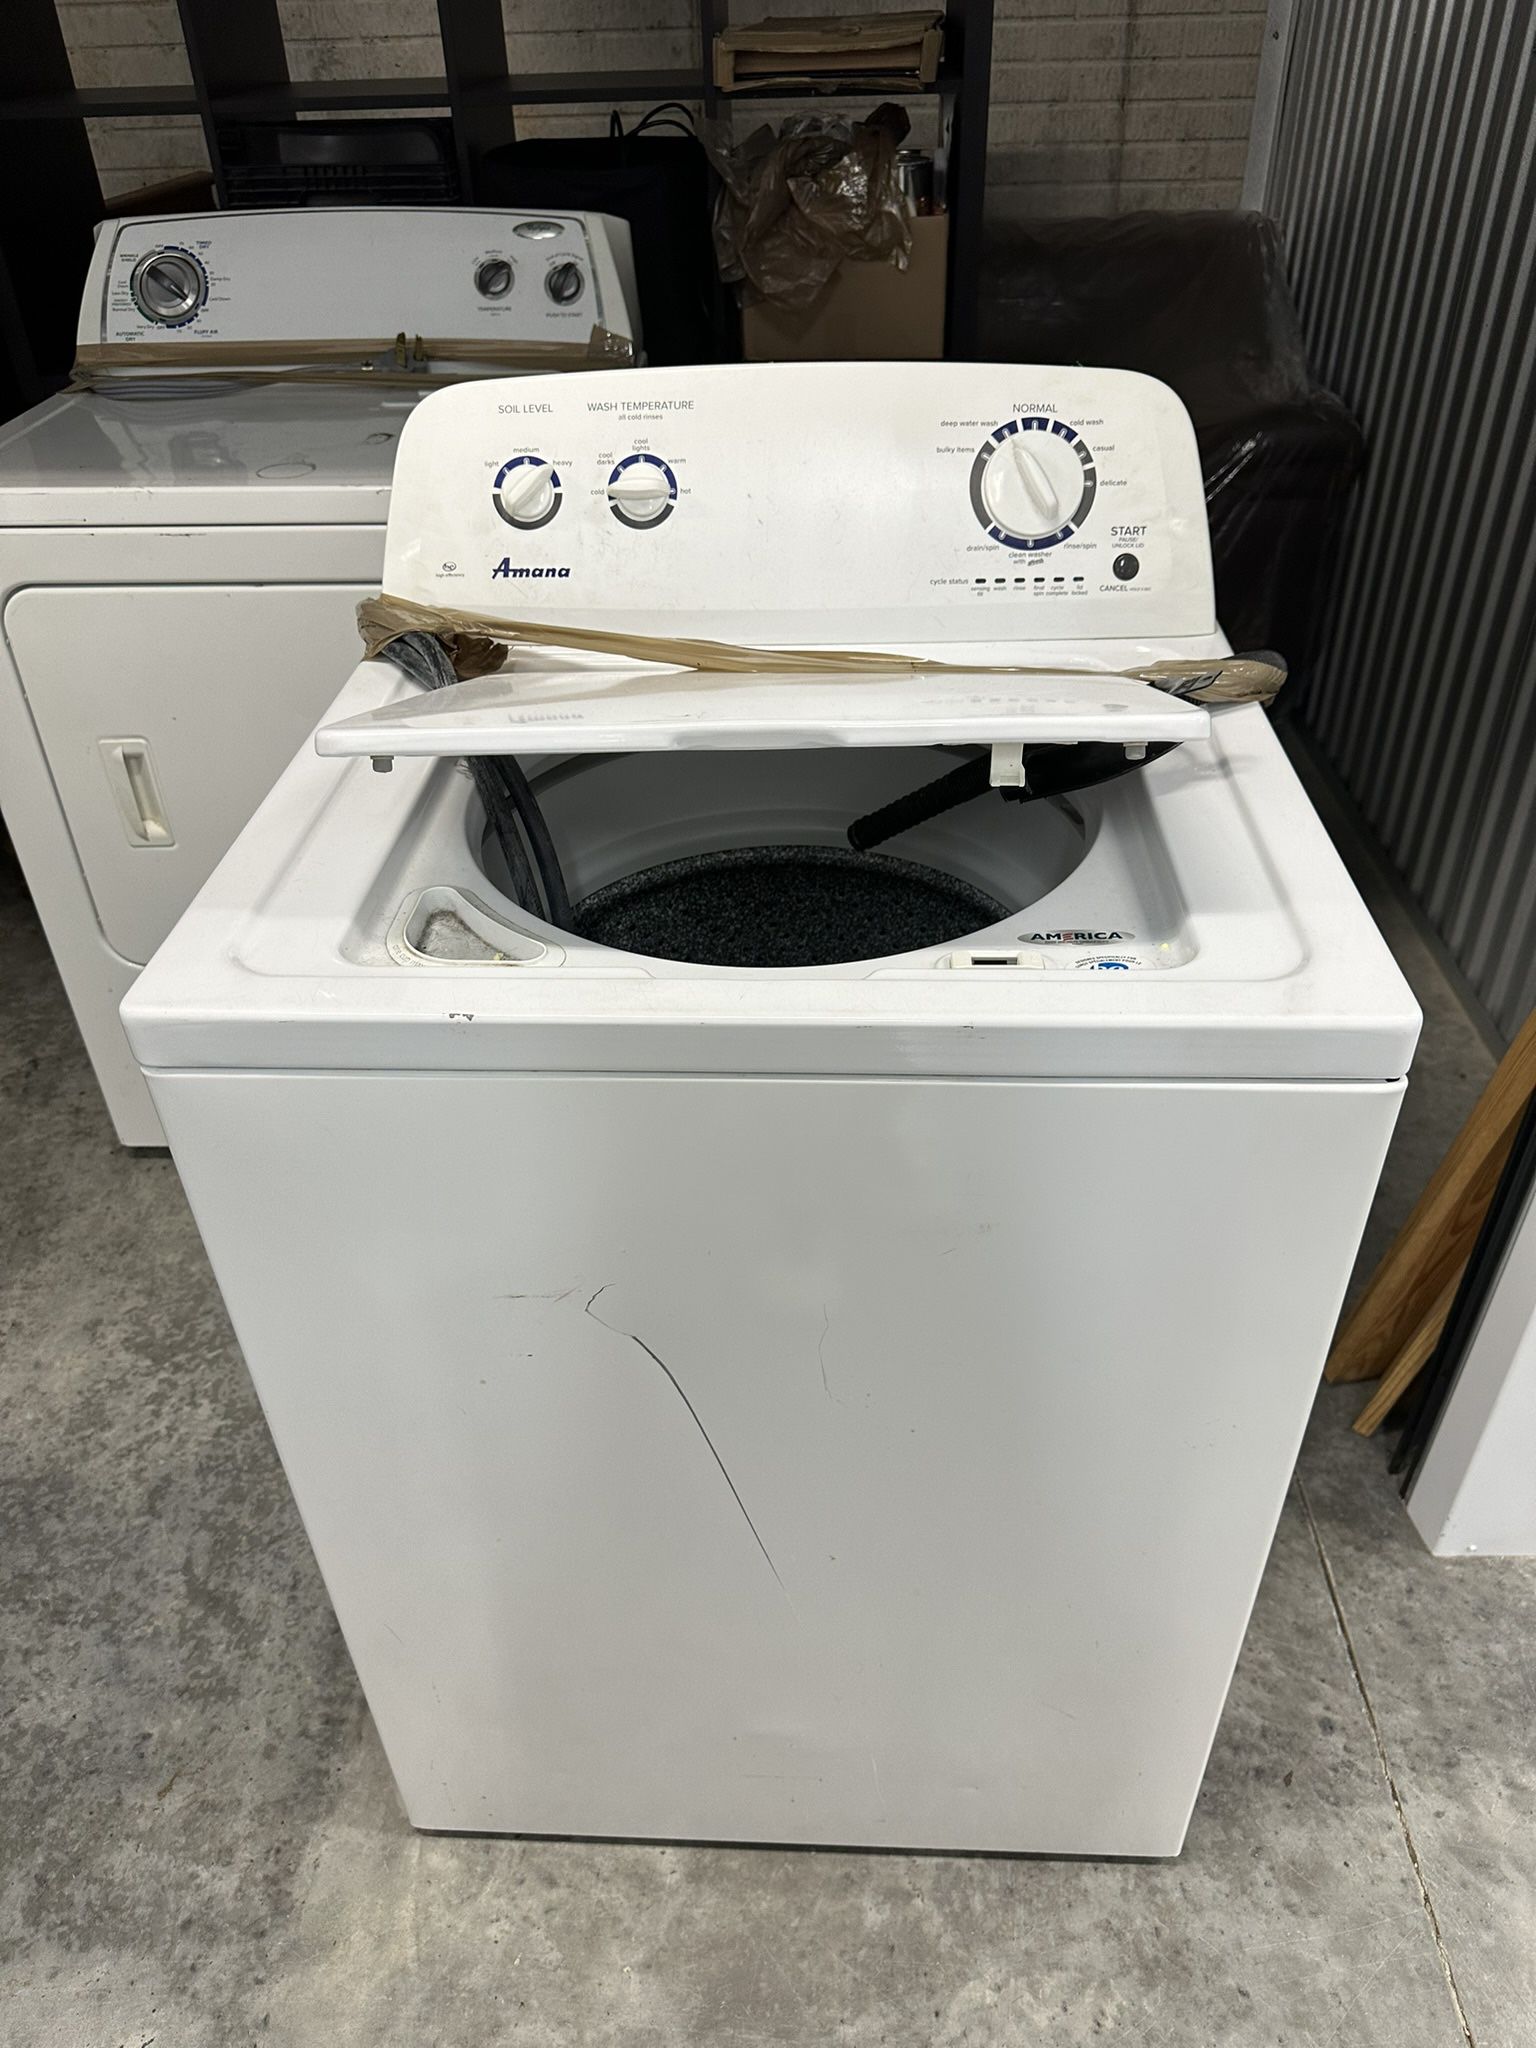 Amana Washer And Whirlpool Dryer